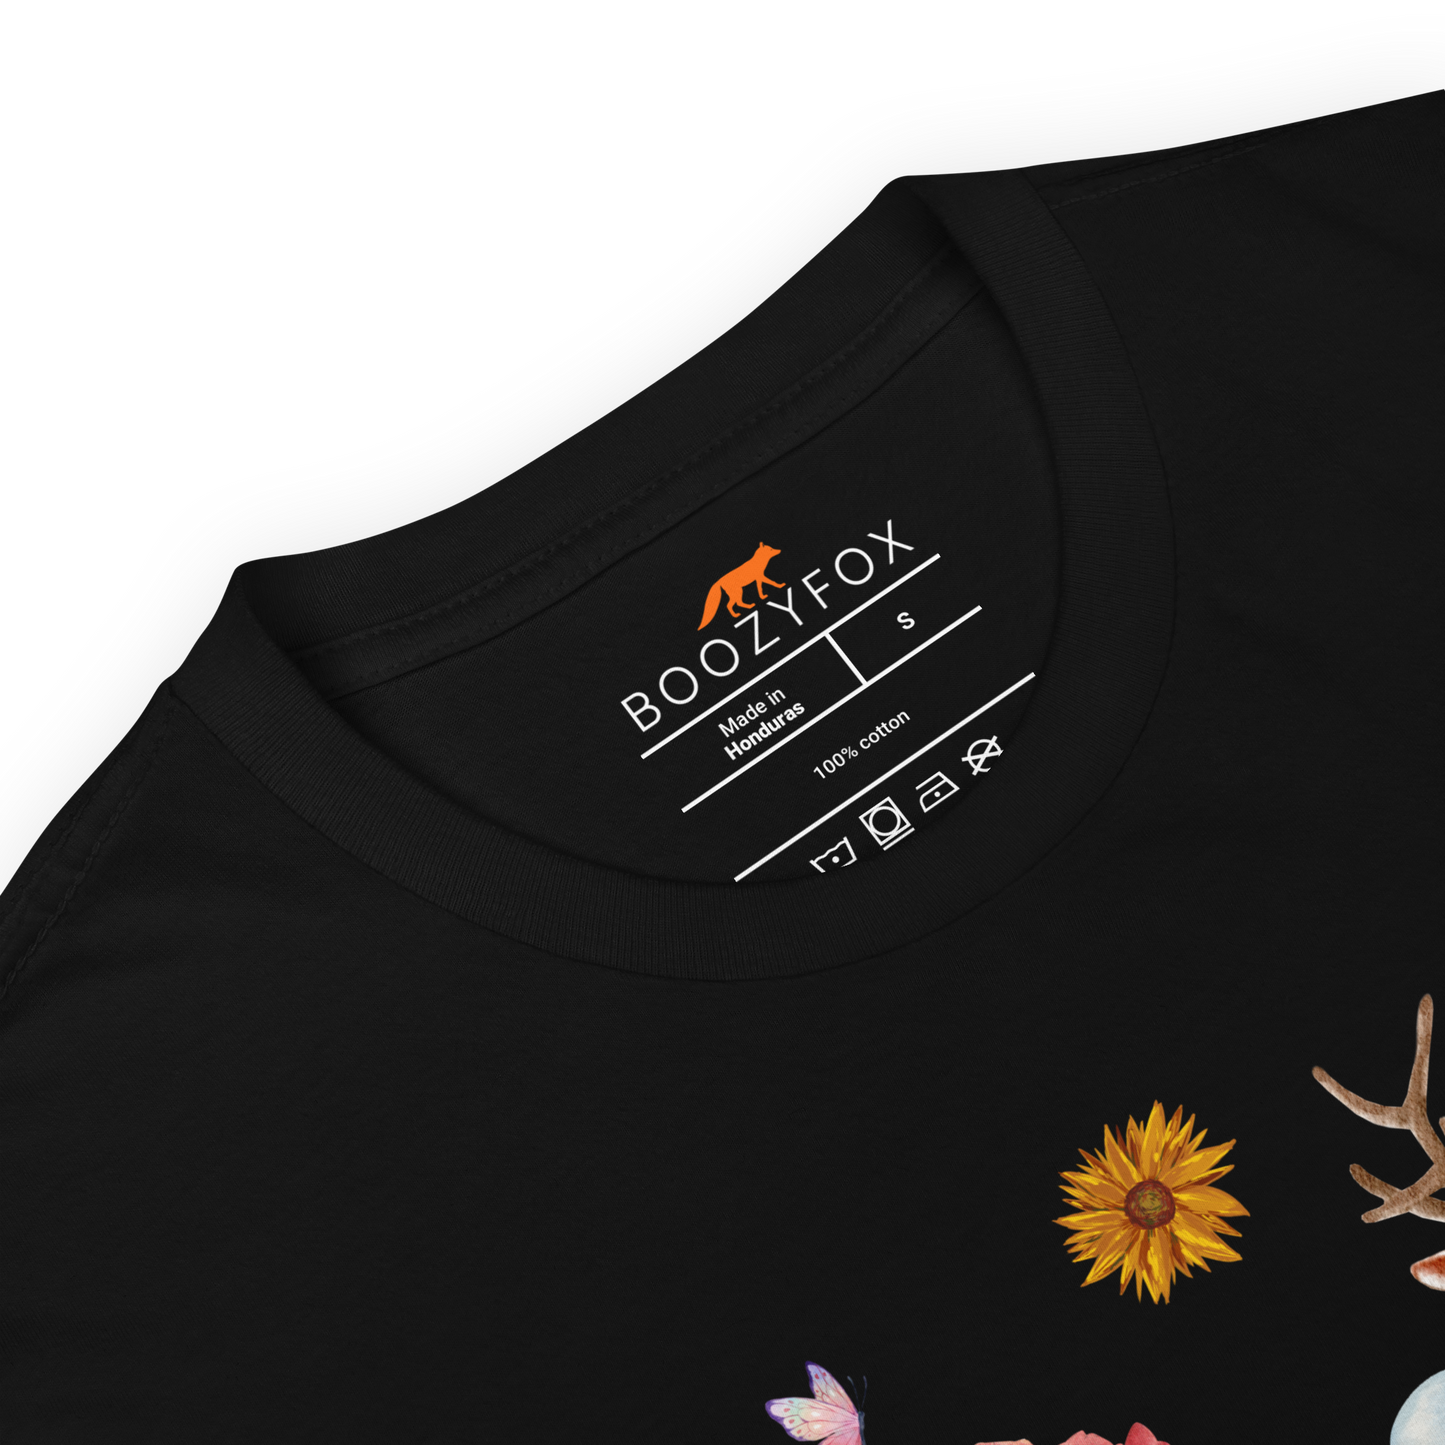 Product details of a Black Summer Is a State of Mind T-Shirt Featuring a Summer Is a State of Mind graphic on the chest - Cute Graphic Summer T-Shirts - Boozy Fox